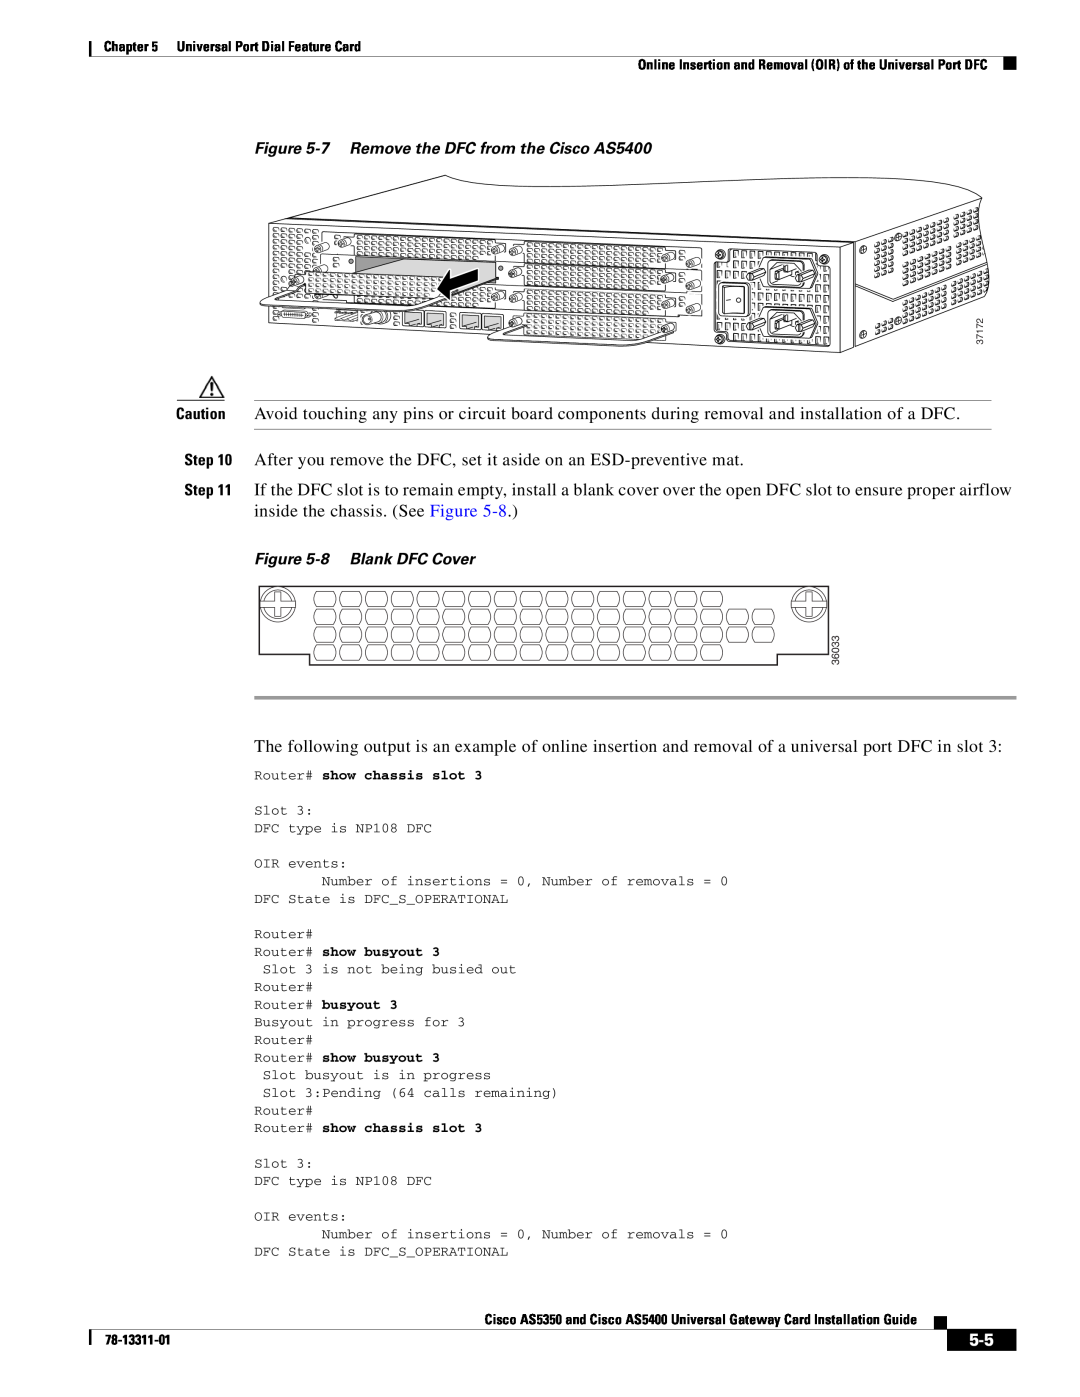 Cisco Systems manual 7 Remove the DFC from the Cisco AS5400, 8 Blank DFC Cover, Universal Port Dial Feature Card 